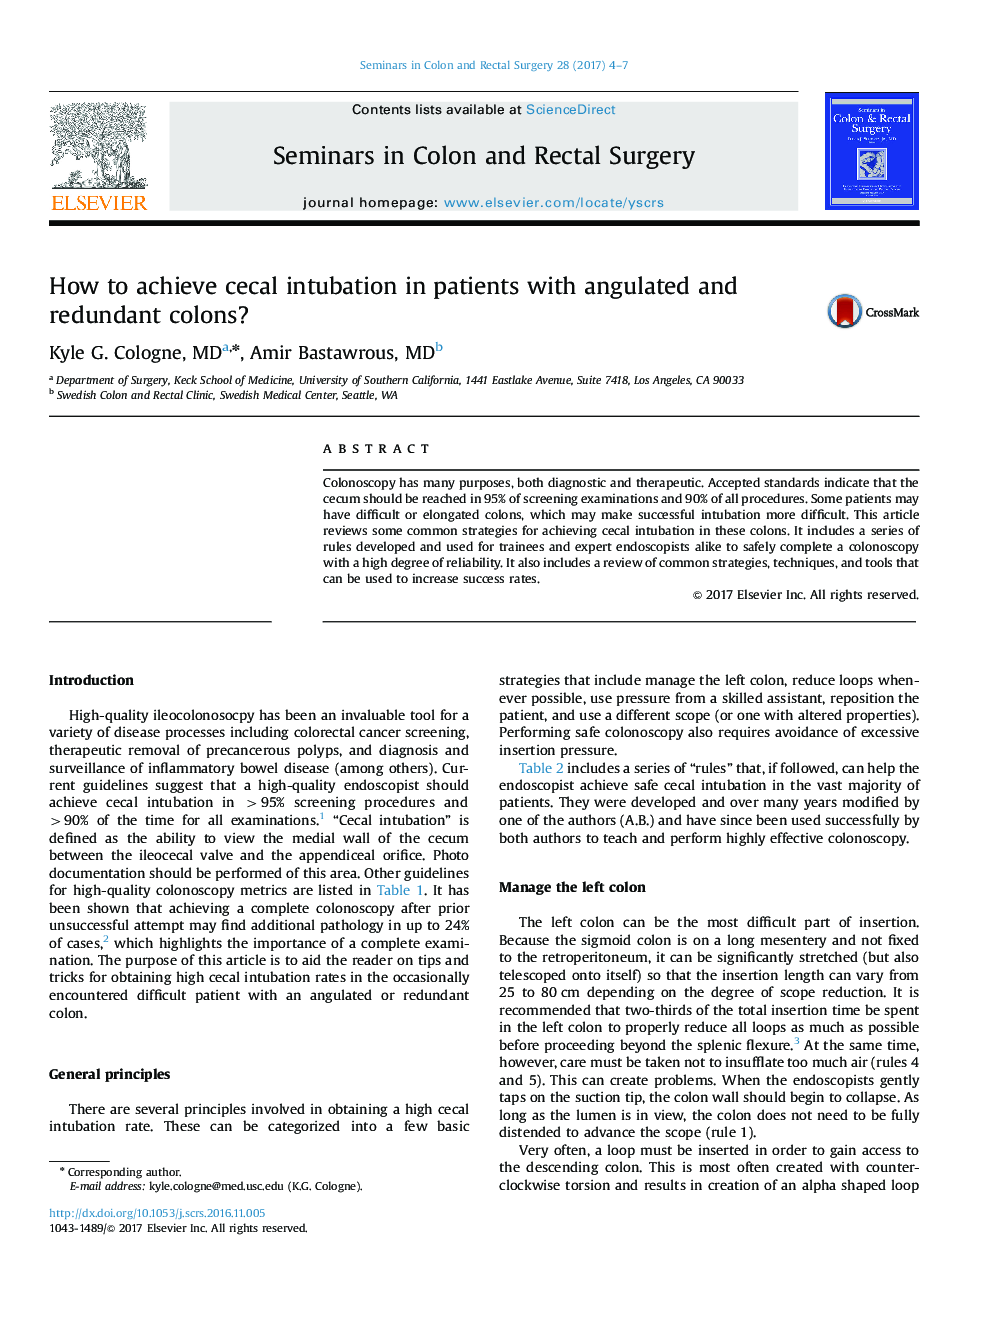 How to achieve cecal intubation in patients with angulated and redundant colons?